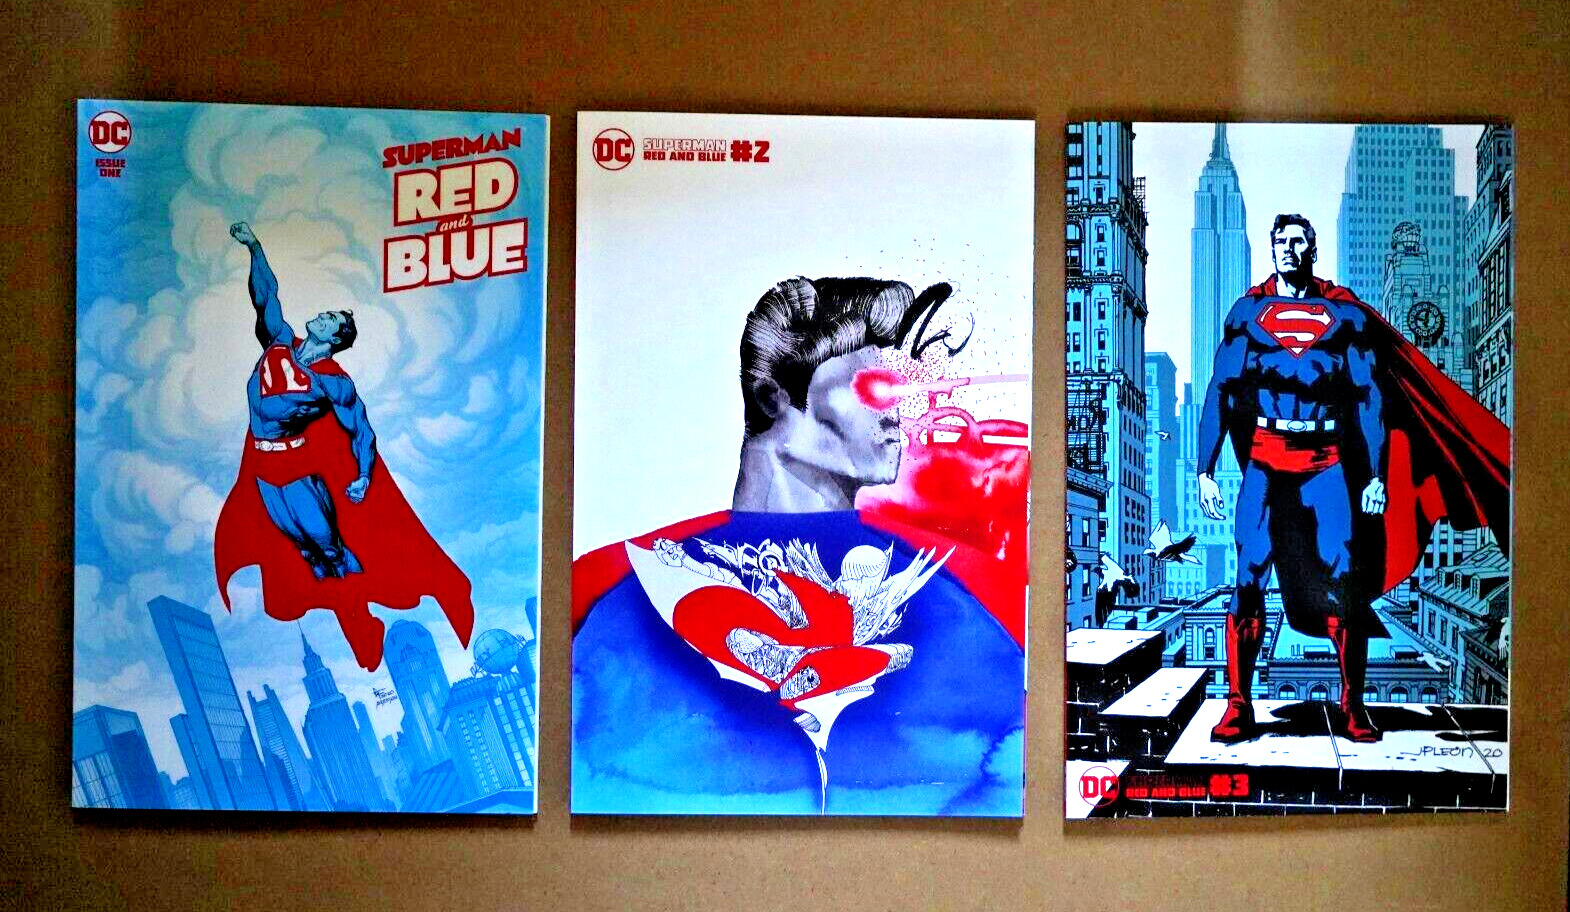 SUPERMAN: RED & BLUE #1, 2 (David Choe Variant) and 3 - DC Comics (2021)